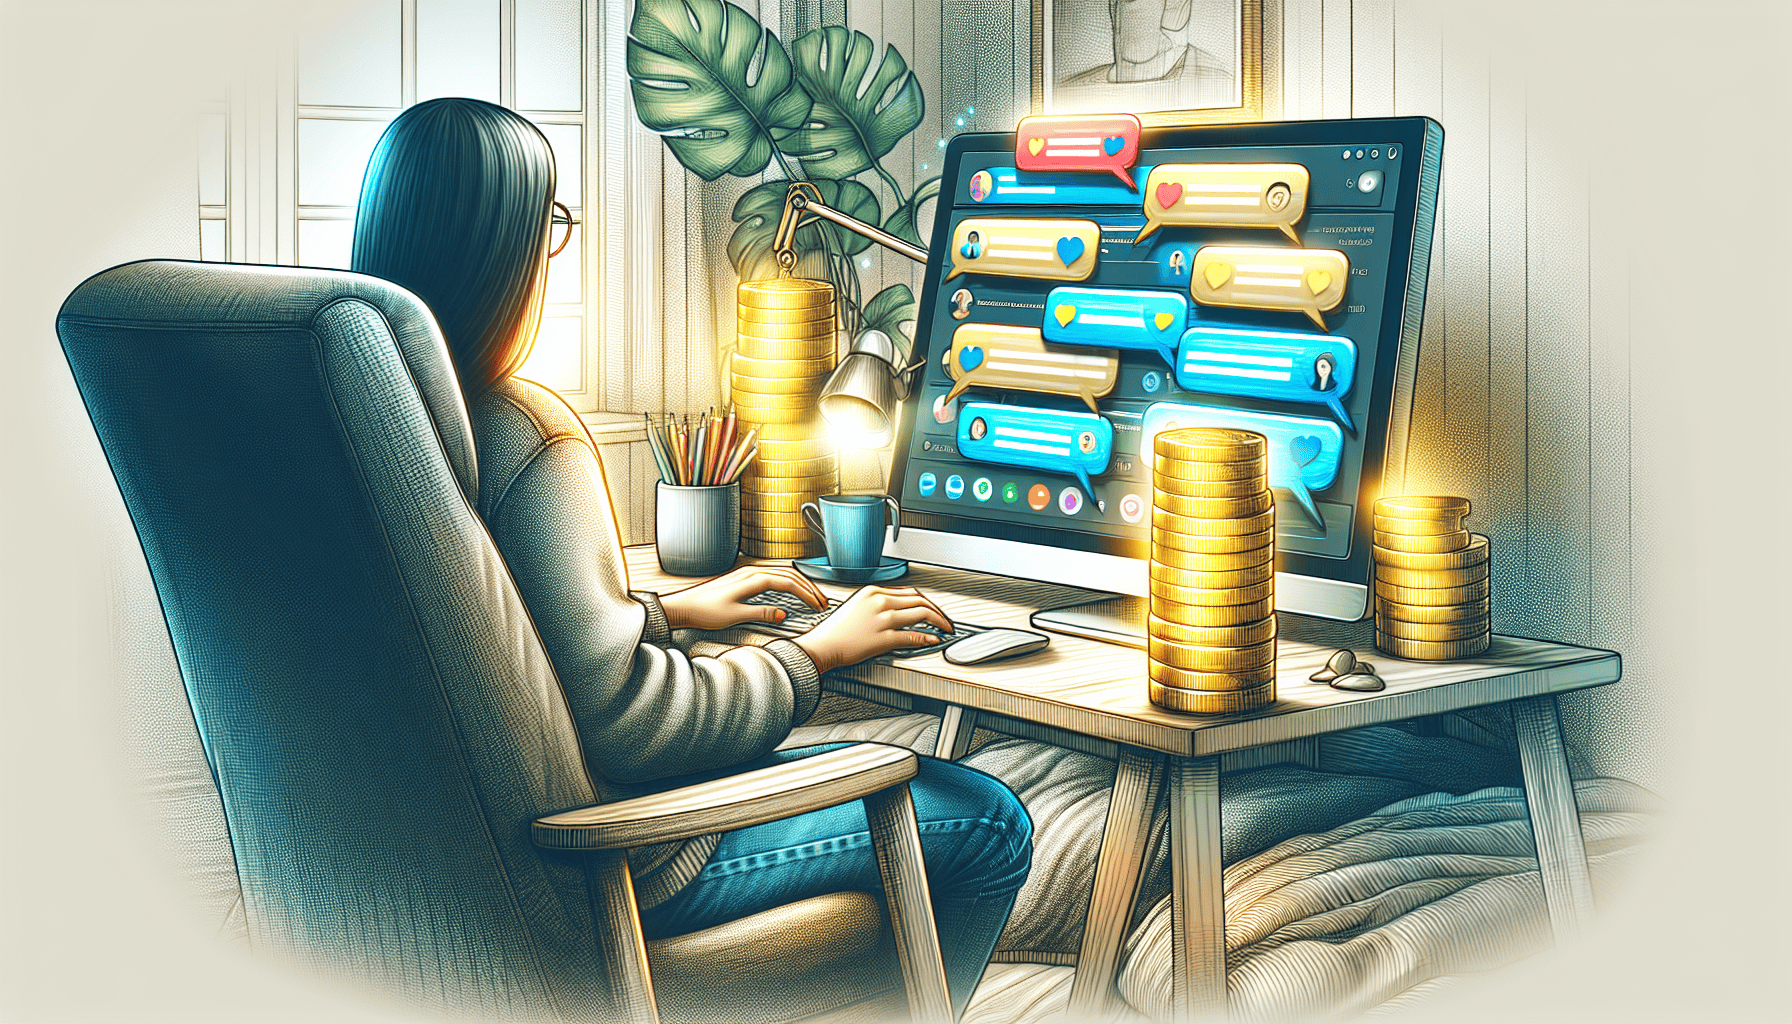 Illustration of a person earning money online through chatting